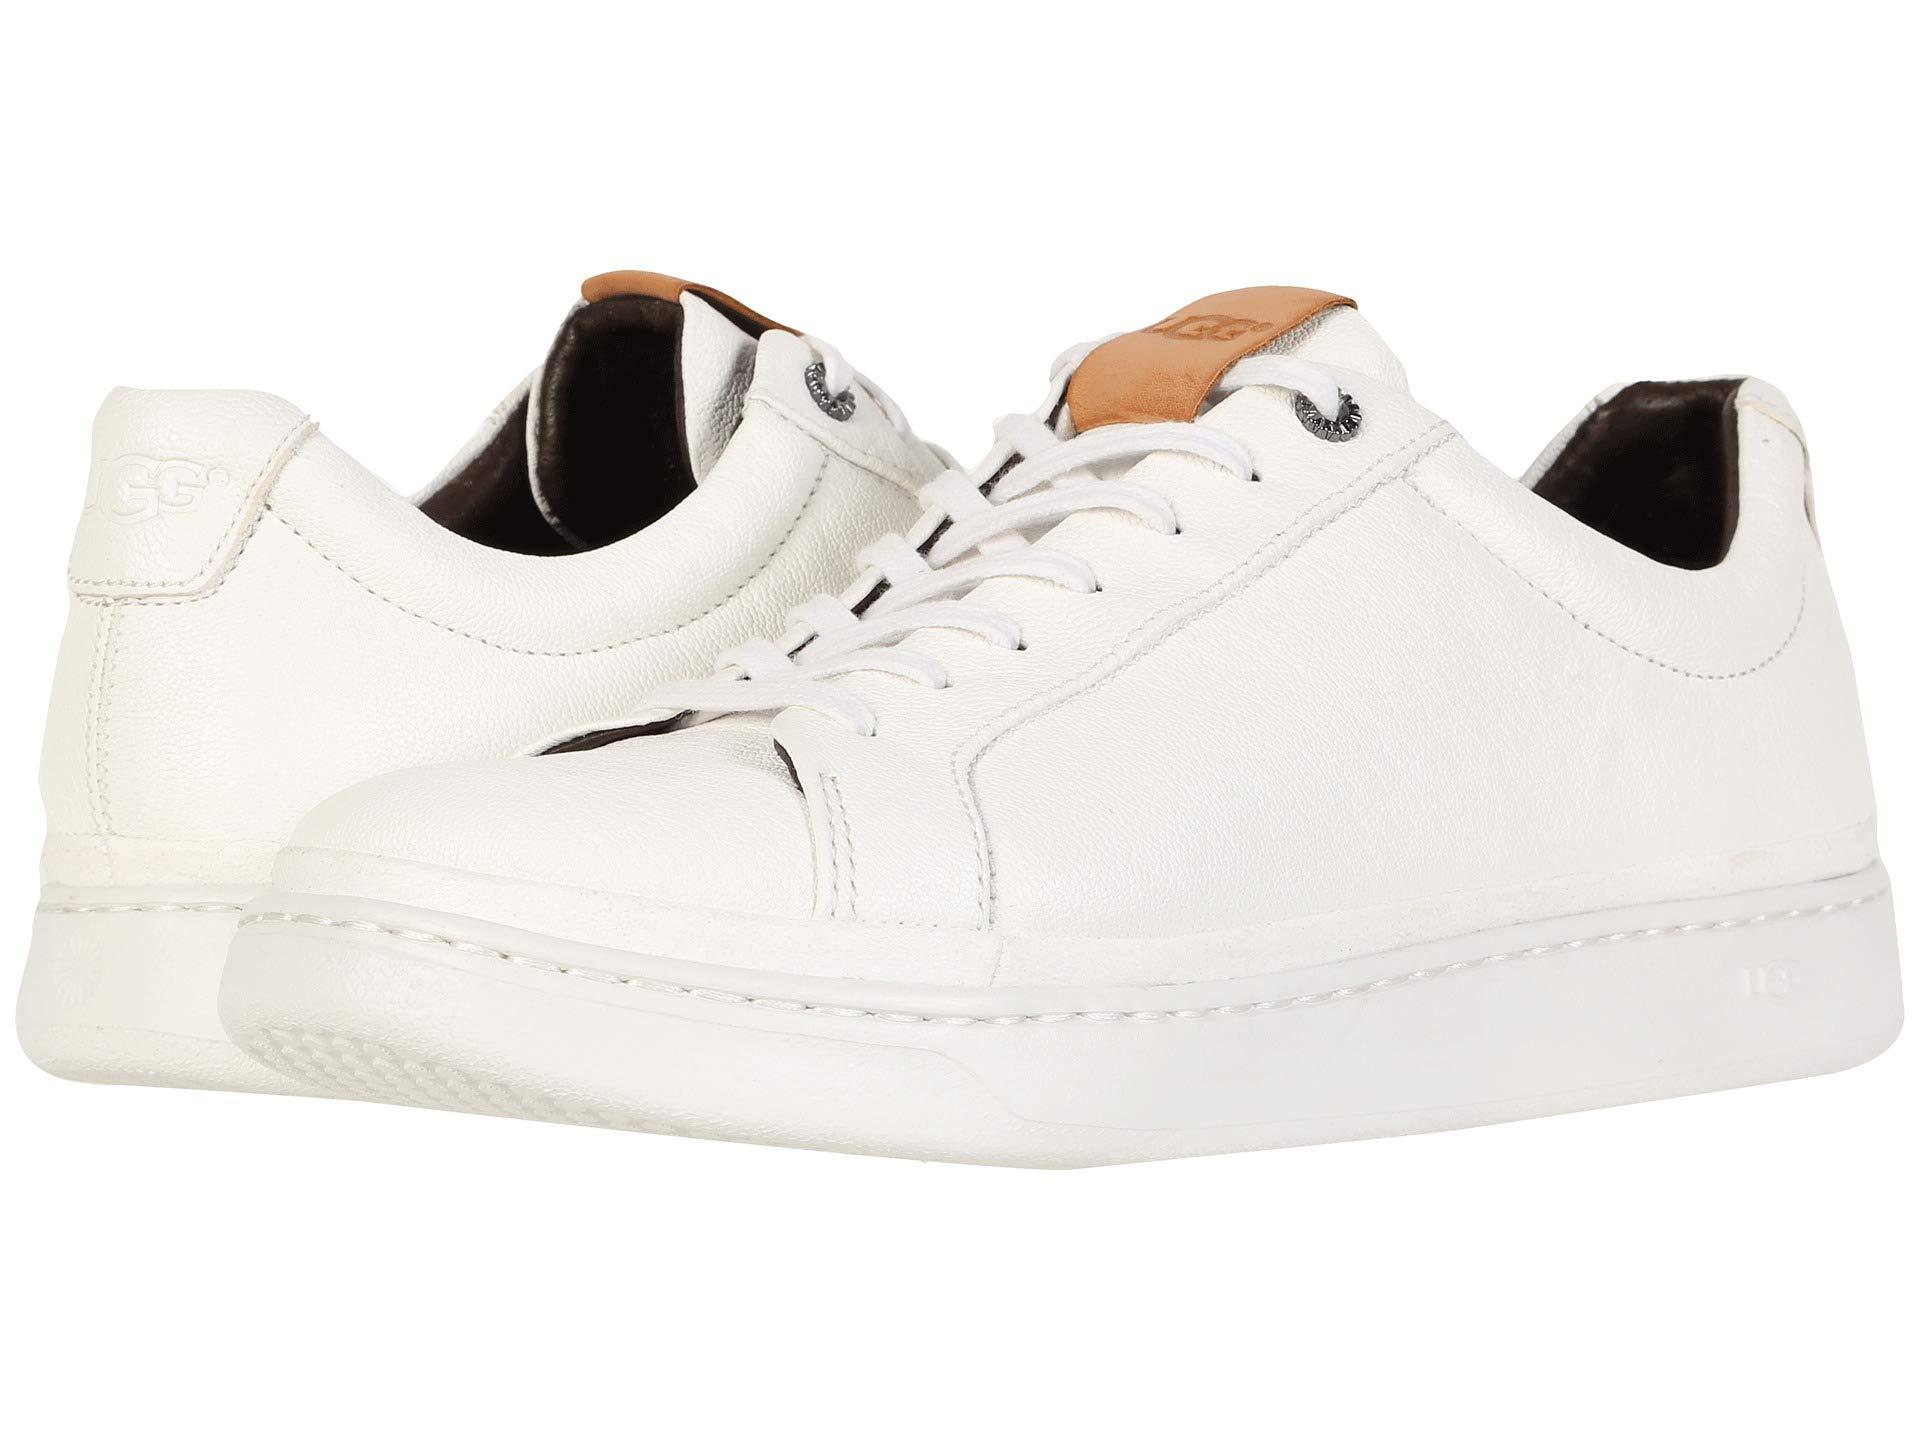 UGG Leather Cali Sneaker Low in White for Men - Lyst